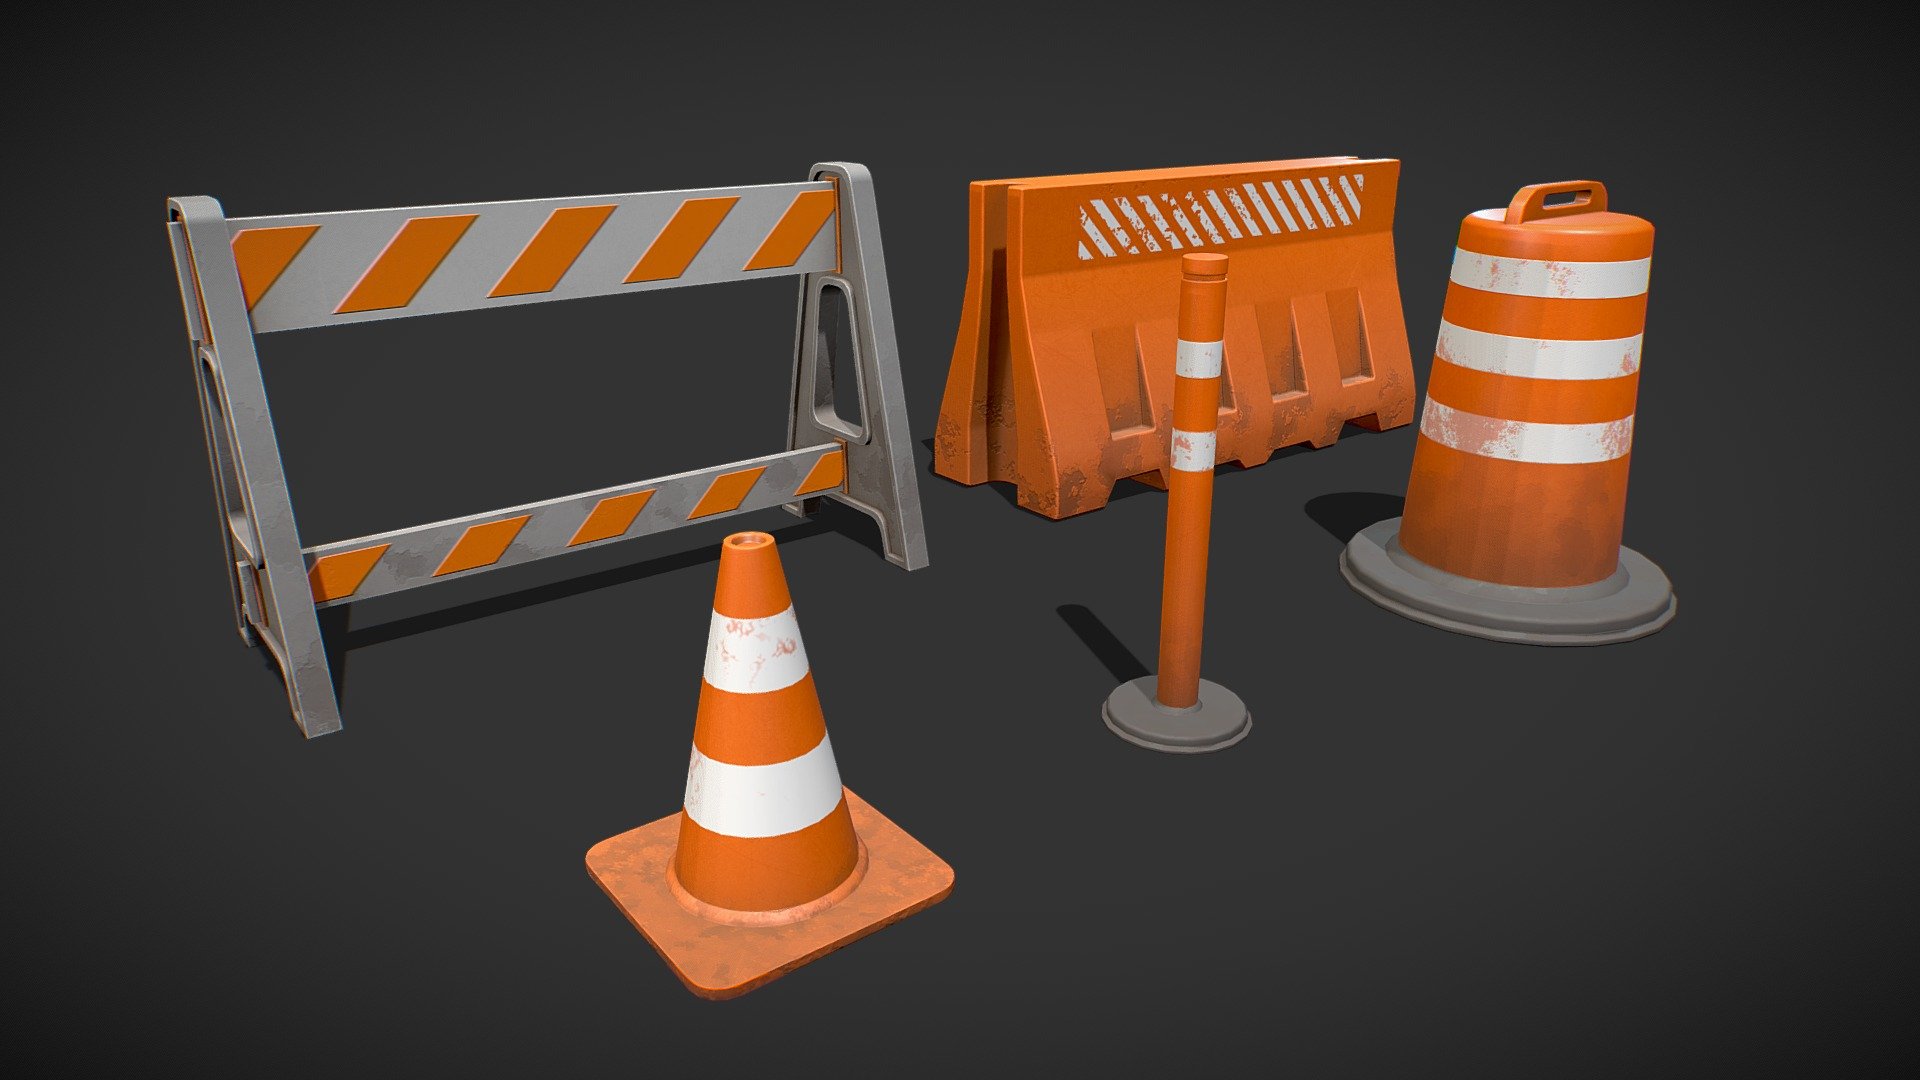 This product have 3 Stylized Traffic Cones, Including 2 types of Traffic Barricades with Stylized PBR Textures. Suitable for any scene. Ready to use in any project.

Are you liked this model? Feel free to take a look on my another models! Here

Features:

.Fbx, .Obj, .Uasset and .Blend files.

Low Poly Mesh game-ready.

Real-World Scale (centimeters).

Unreal Project 4.18+

Number of models: 5

Custom Collision for Unreal Engine 4 (Handmade).

Tris Count: 520 to 1,040.

Number of Textures (PNG): 20

Number of Textures (UE4): 15

Number of Materials (UE4): 1 Material and 5 Material Instances

Stylized PBR Textures (1024x1024) (PNG).

Type of Textures: Base Color, Roughness, Metallic, Normal Map and Ambient Occlusion (PNG).

Combined RMA texture (Roughness, Metallic and Ambient Occlusion) for Unreal Engine 4 (PNG) 3d model